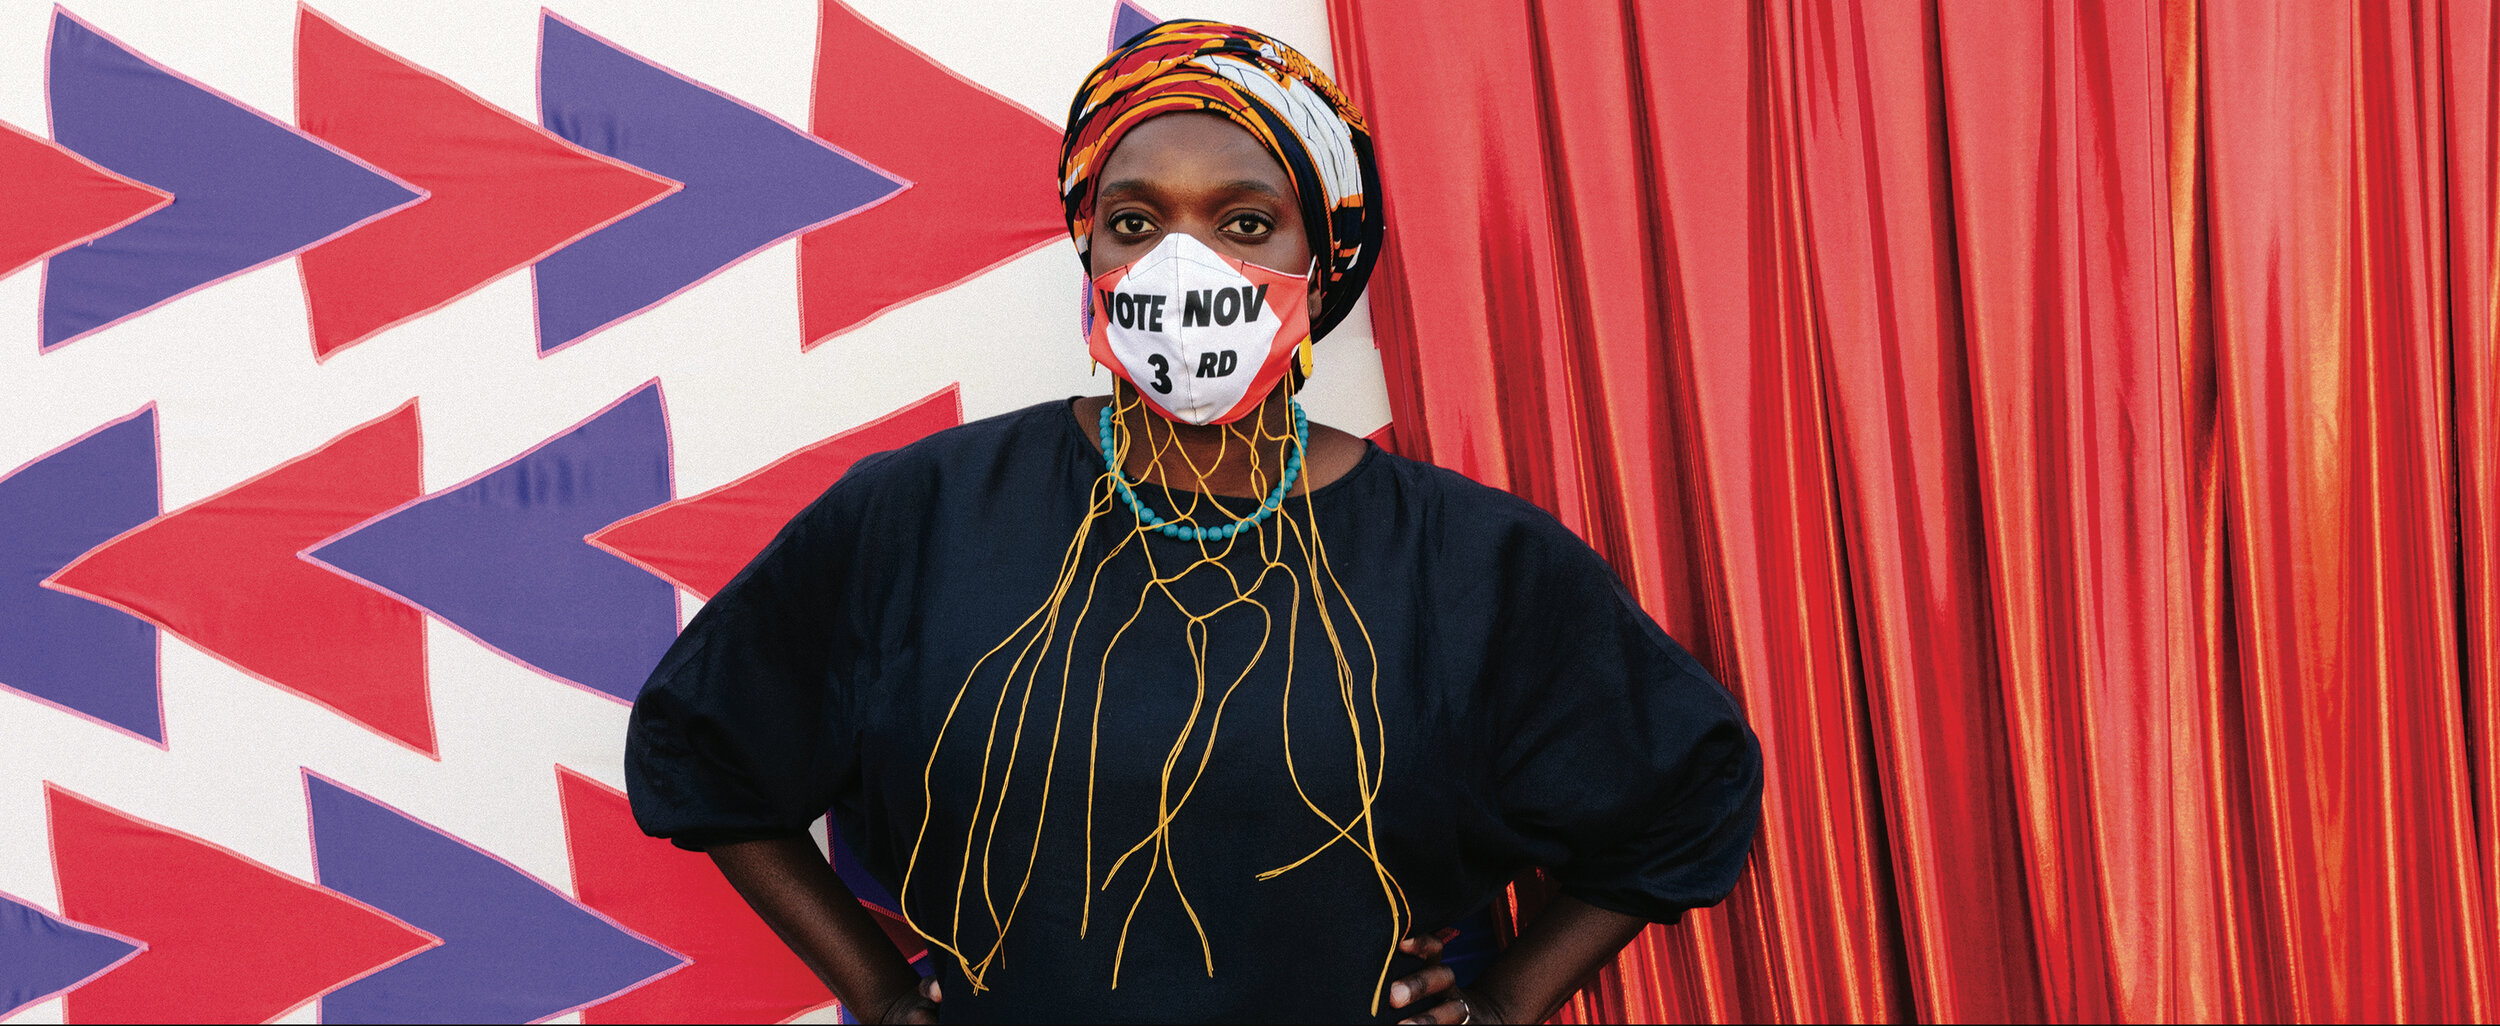  Molly Surazhsky PPE • People’s Power Enhancement (Billboard 8) 2020 Model featured: Njideka Akunyili Crosby   Link to press release   Photo by Courtney Coles 